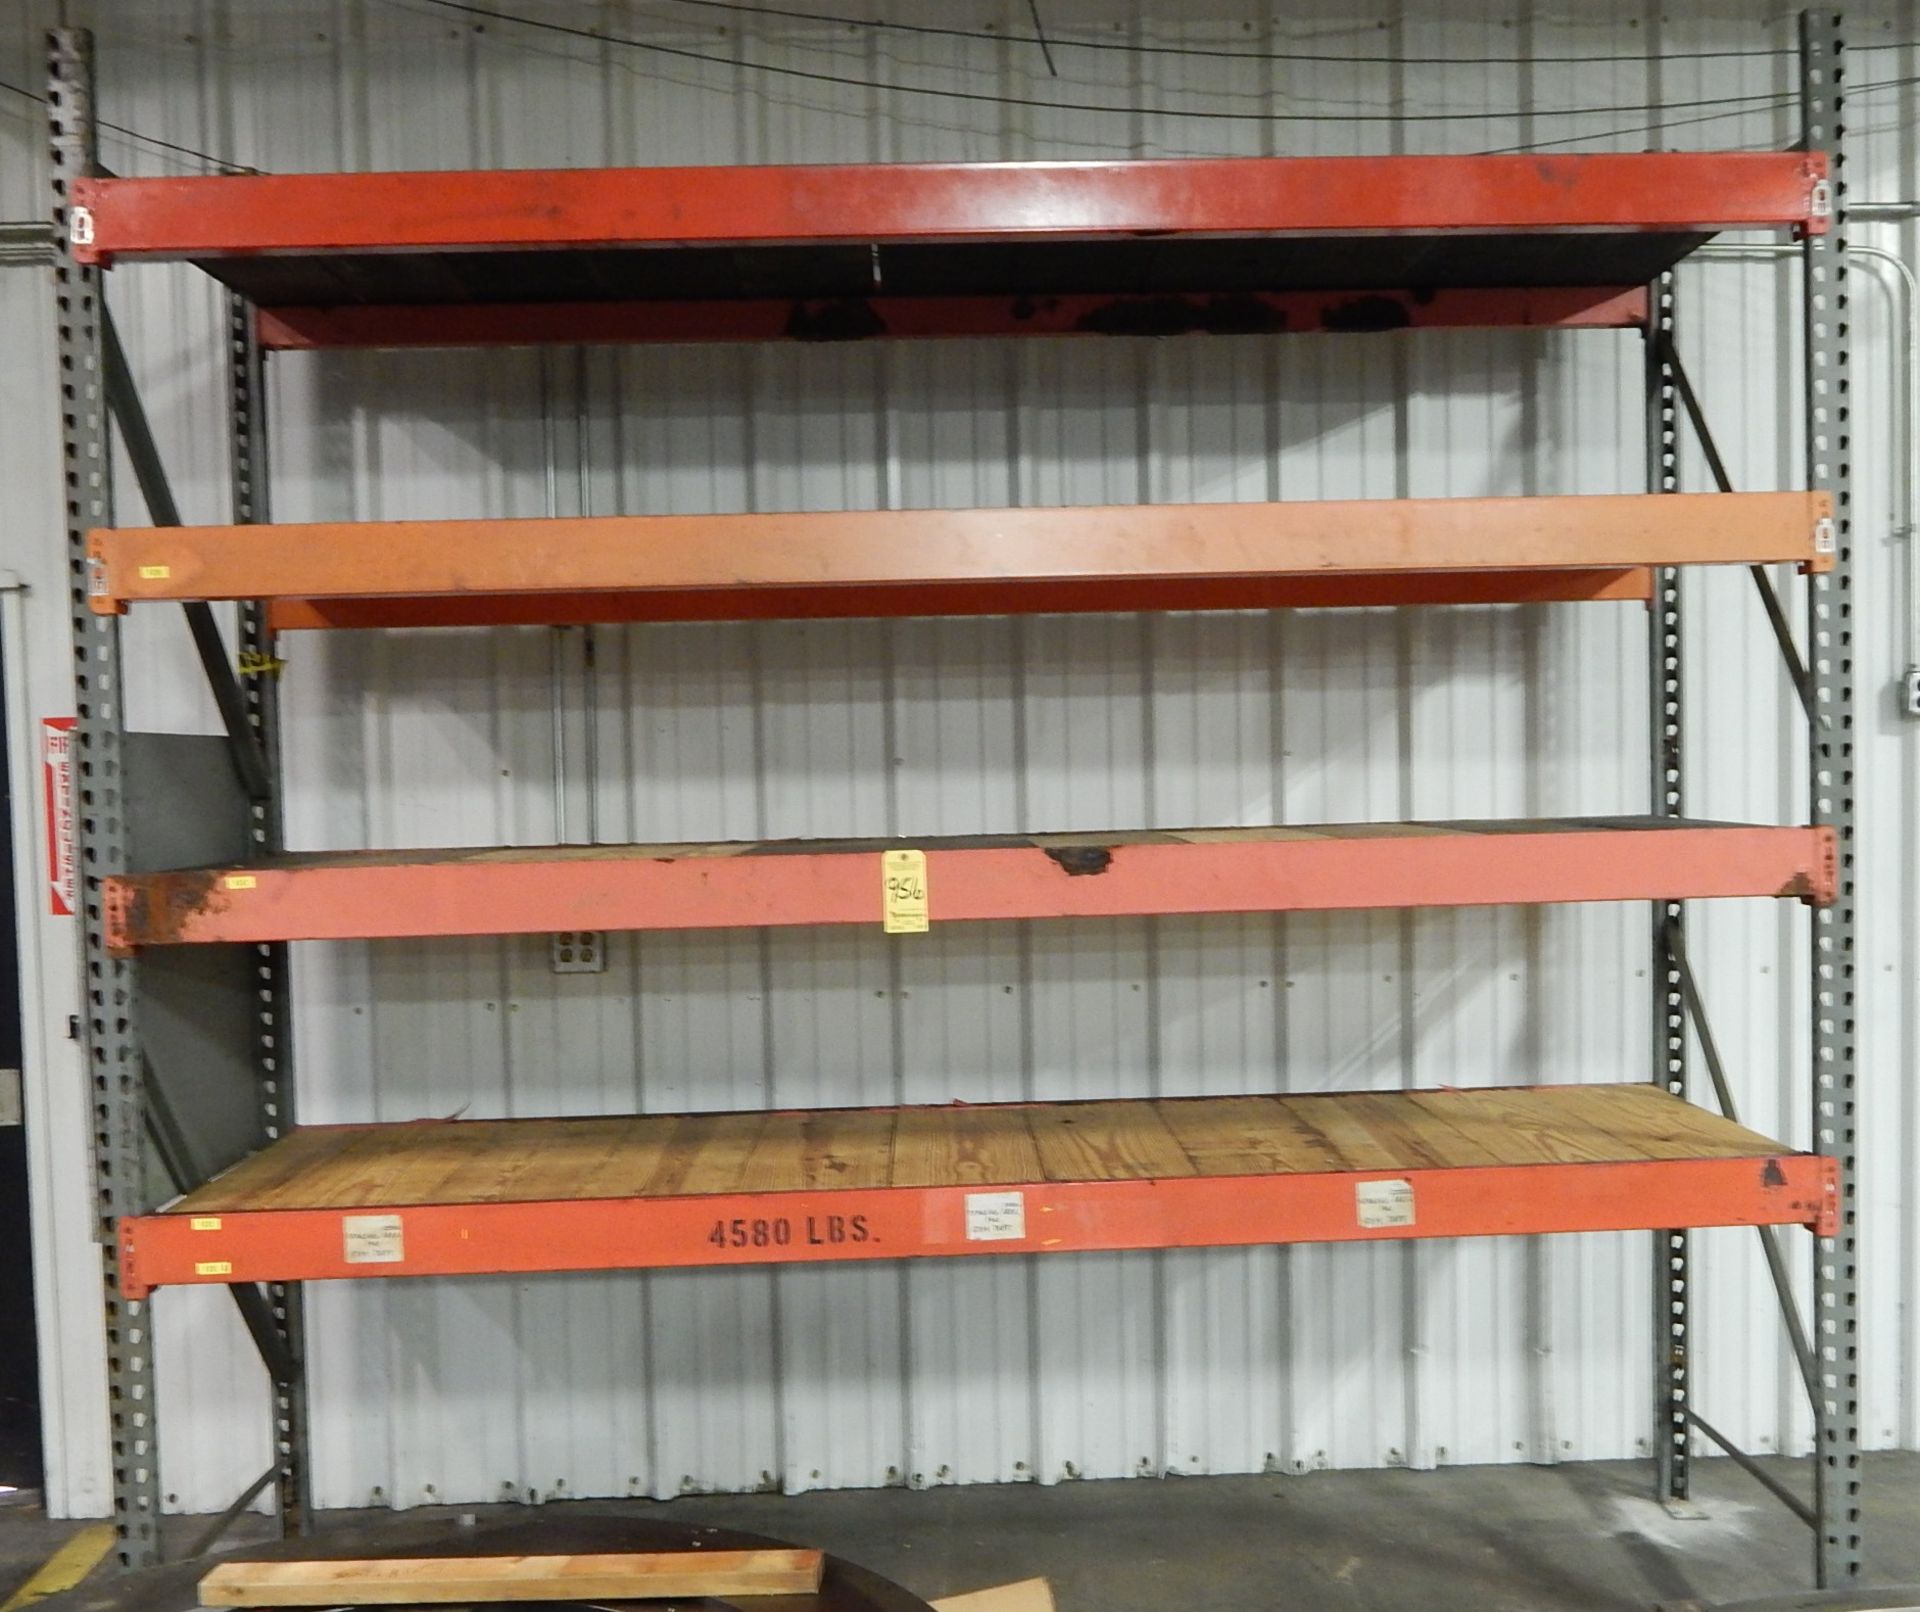 Pallet Racking, (1) Section, 2 Uprights, 8 Cross Beams, 10' Height, 36" Deep, 10' Wide, 6" Beams